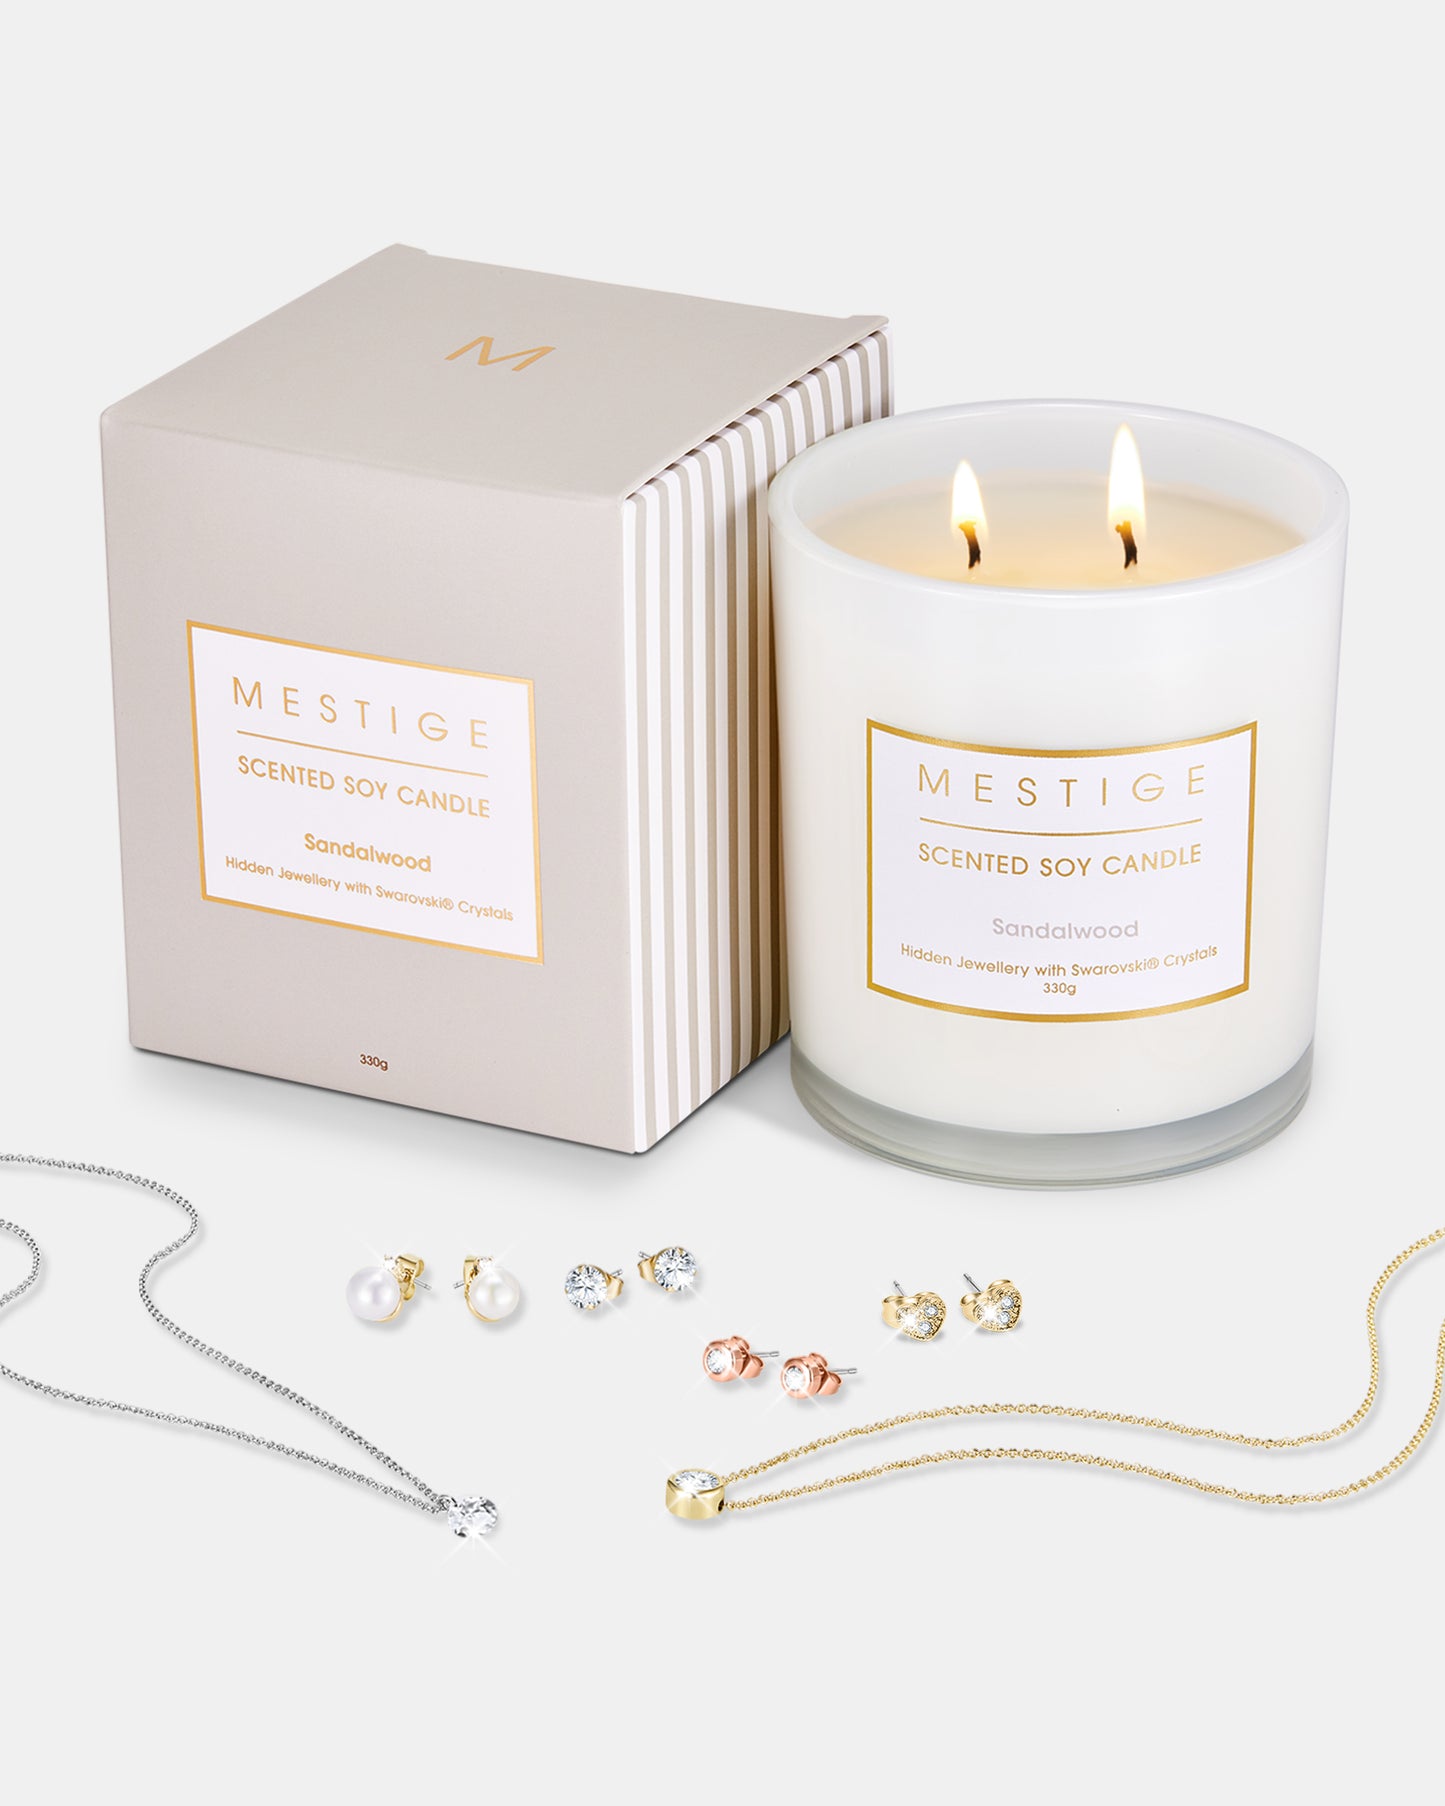 Sandalwood - Clove and Musk Scented Soy Candle with Hidden Jewellery